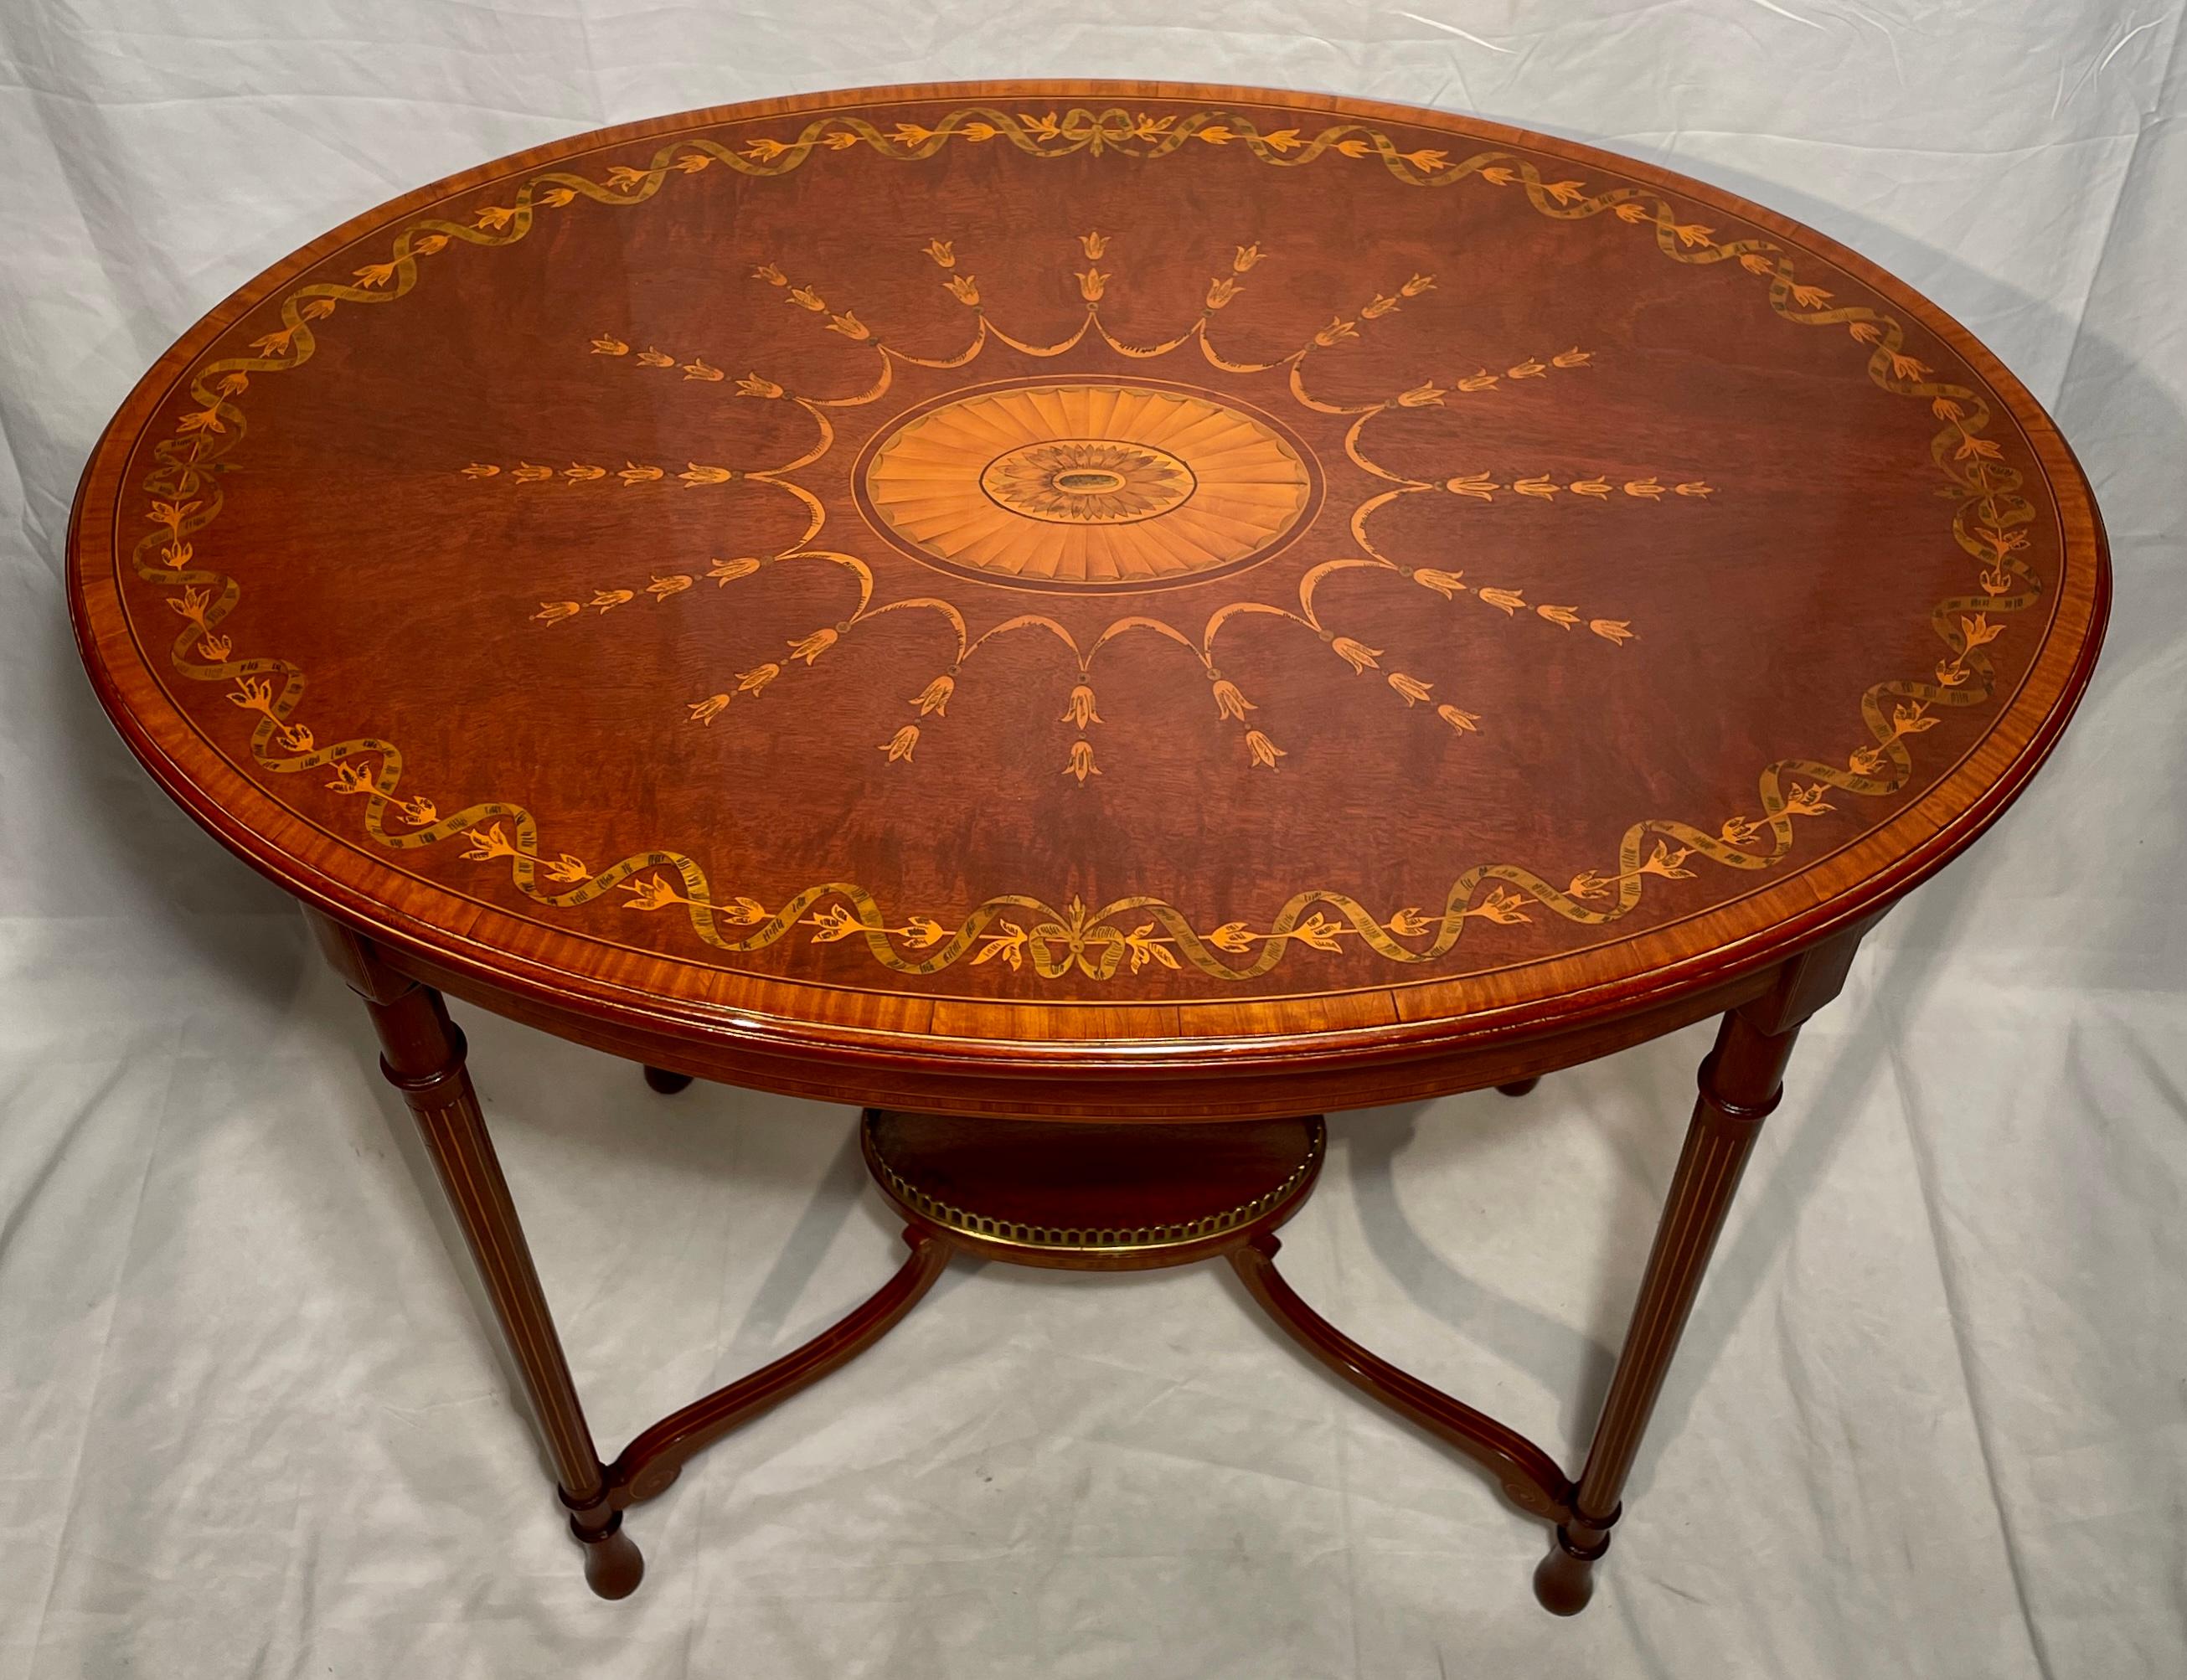 Antique Late 19th Century English Mahogany Oval Table with Inlay.
We currently have 2 of these and they can be sold individually or as a pair.